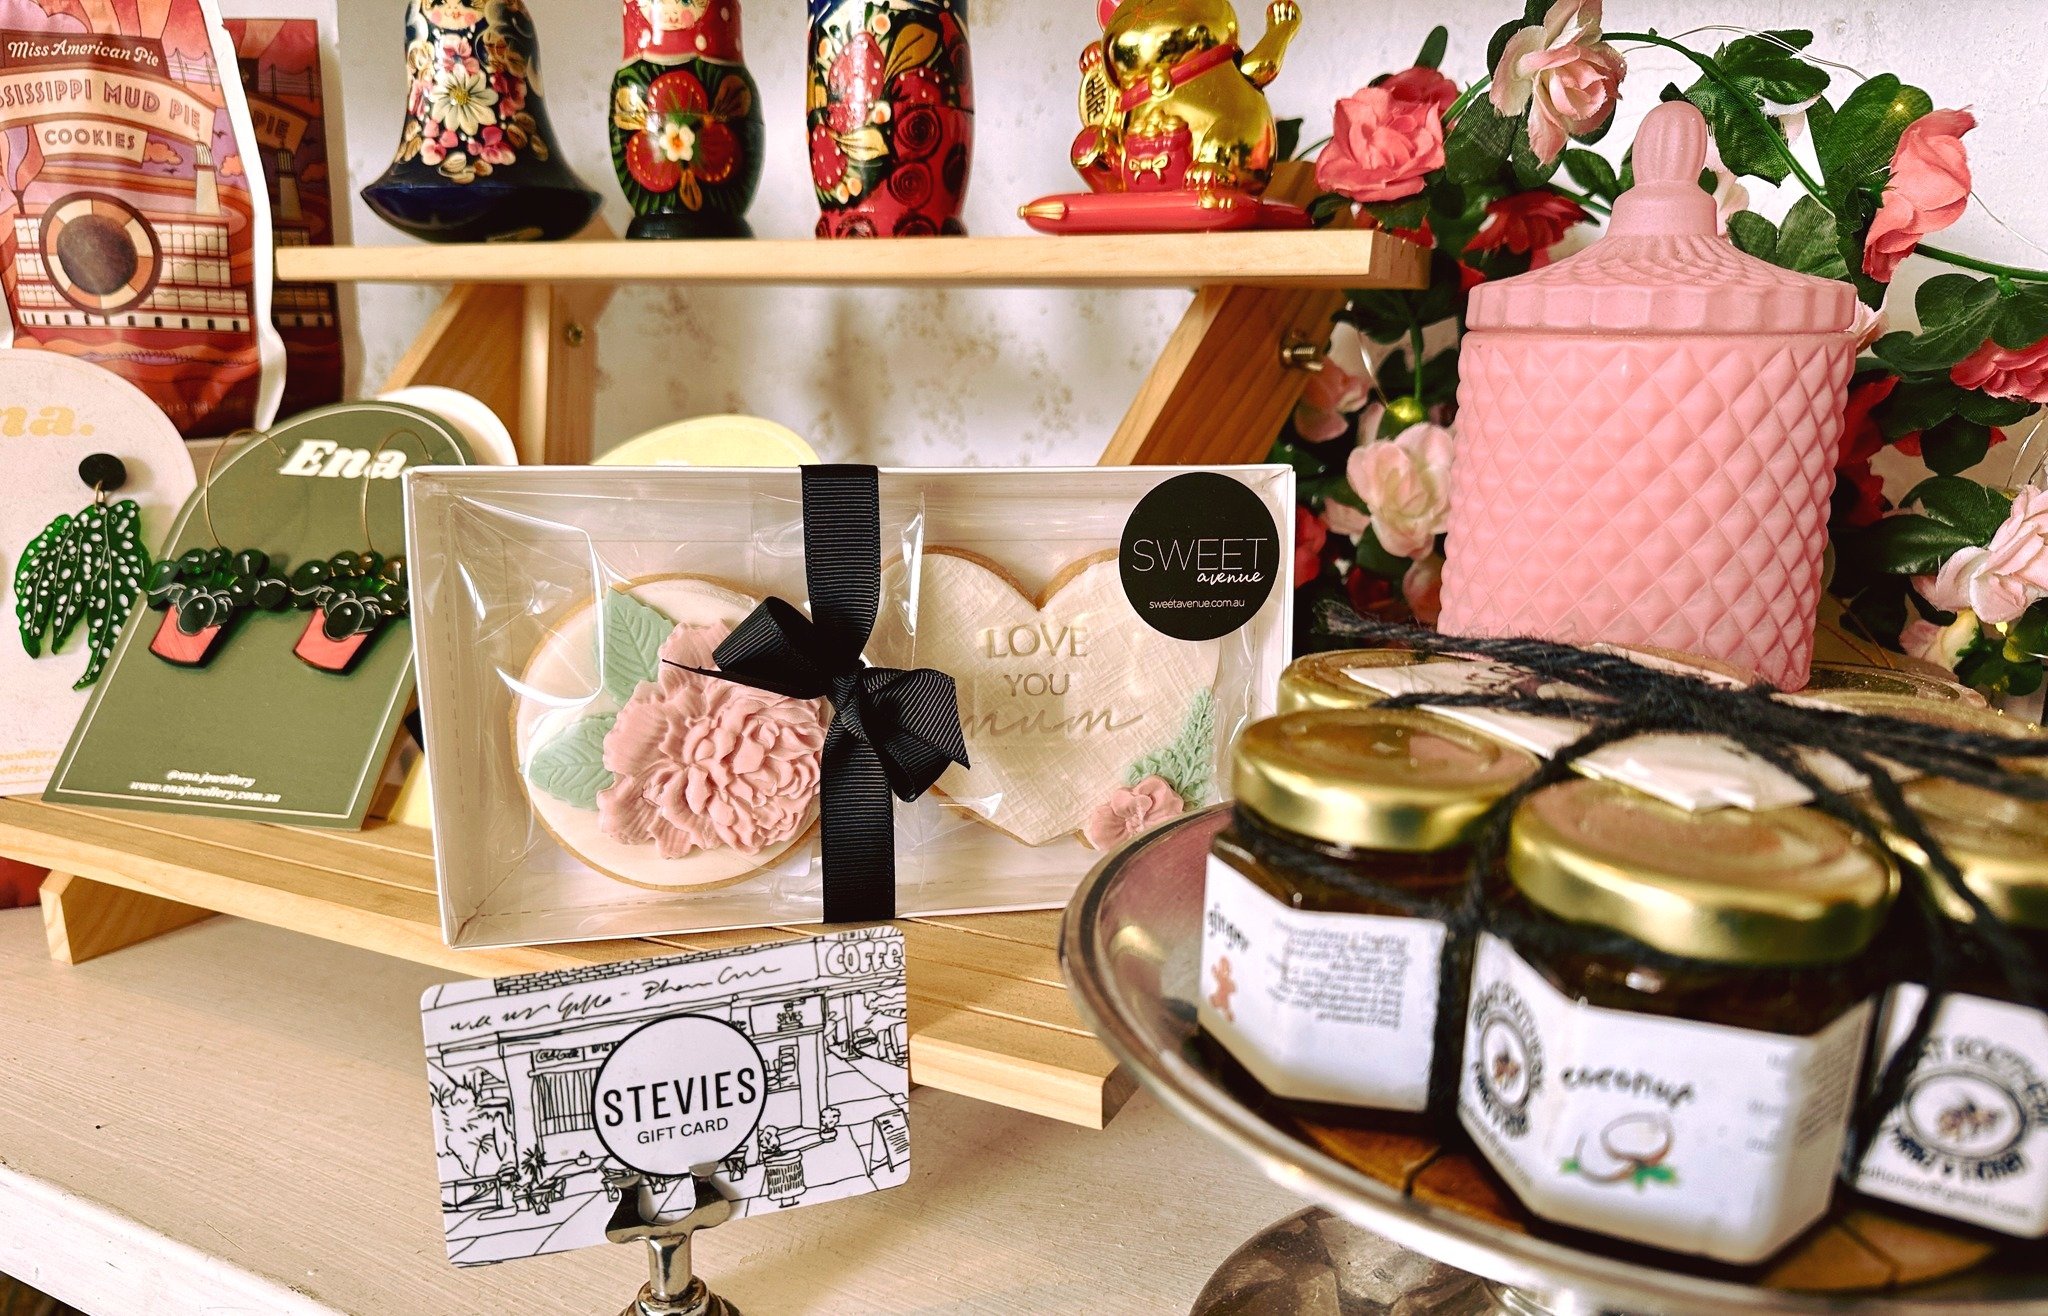 Love your mum! Mother's Day Specials at Stevie's- 
We've got amazing products, gifts and produce for make-your-own hampers for Mum, as well as our Stevie's Gift Cards. We also have a mouth watering pre-order menu- 
Jam &amp; Croissant Box
Family Brea